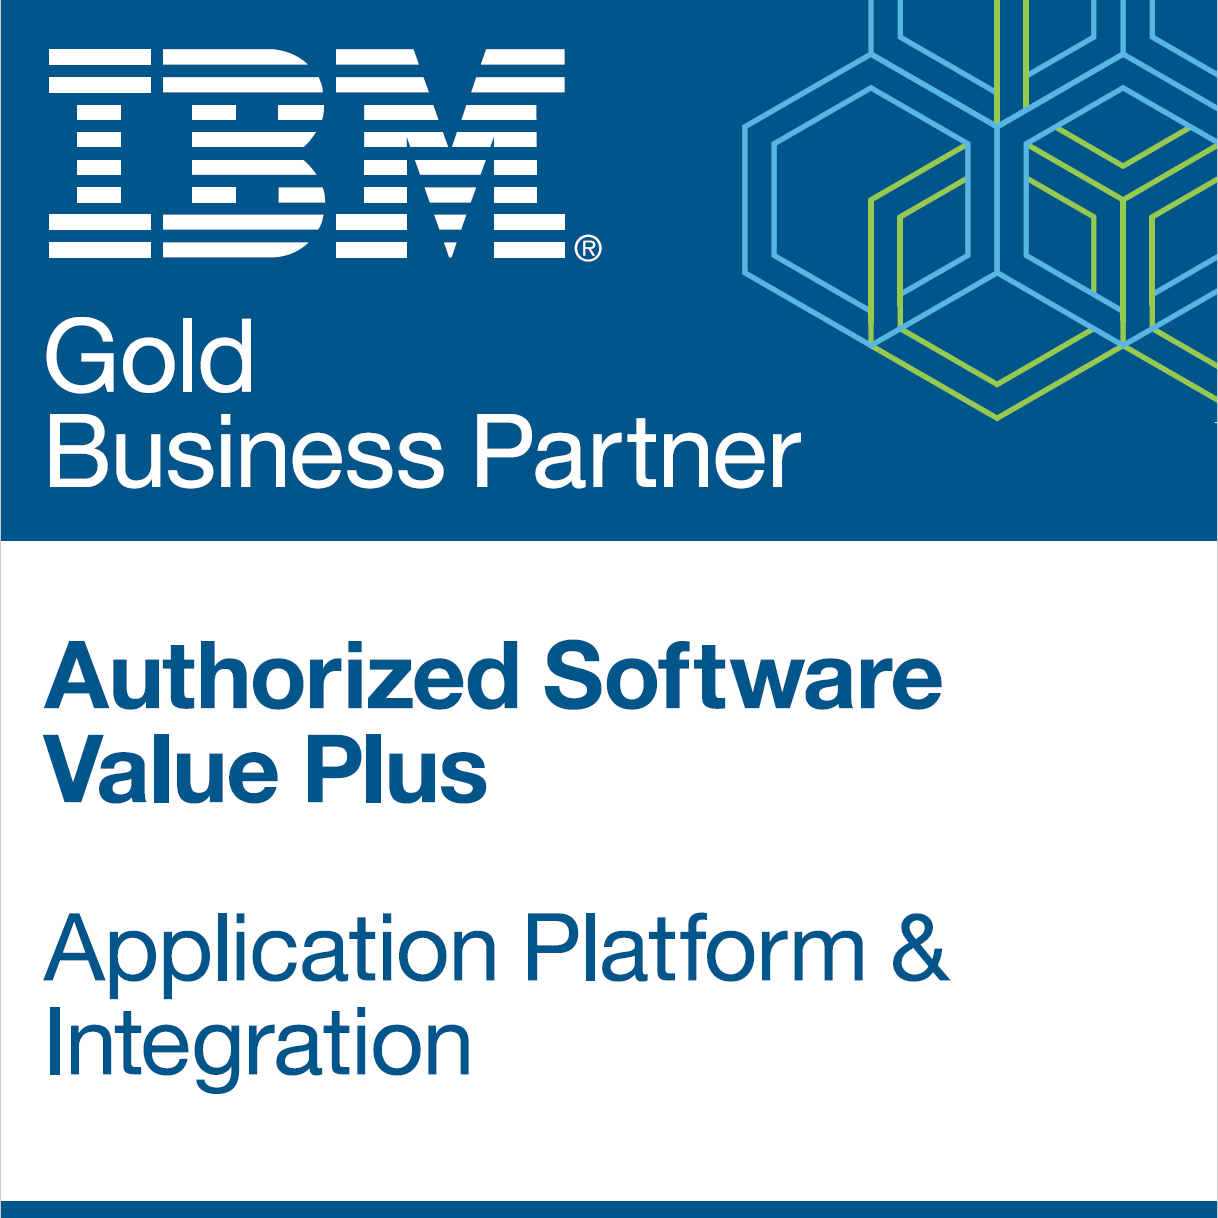 ABS is an IBM Premier Business Partner and software reseller...